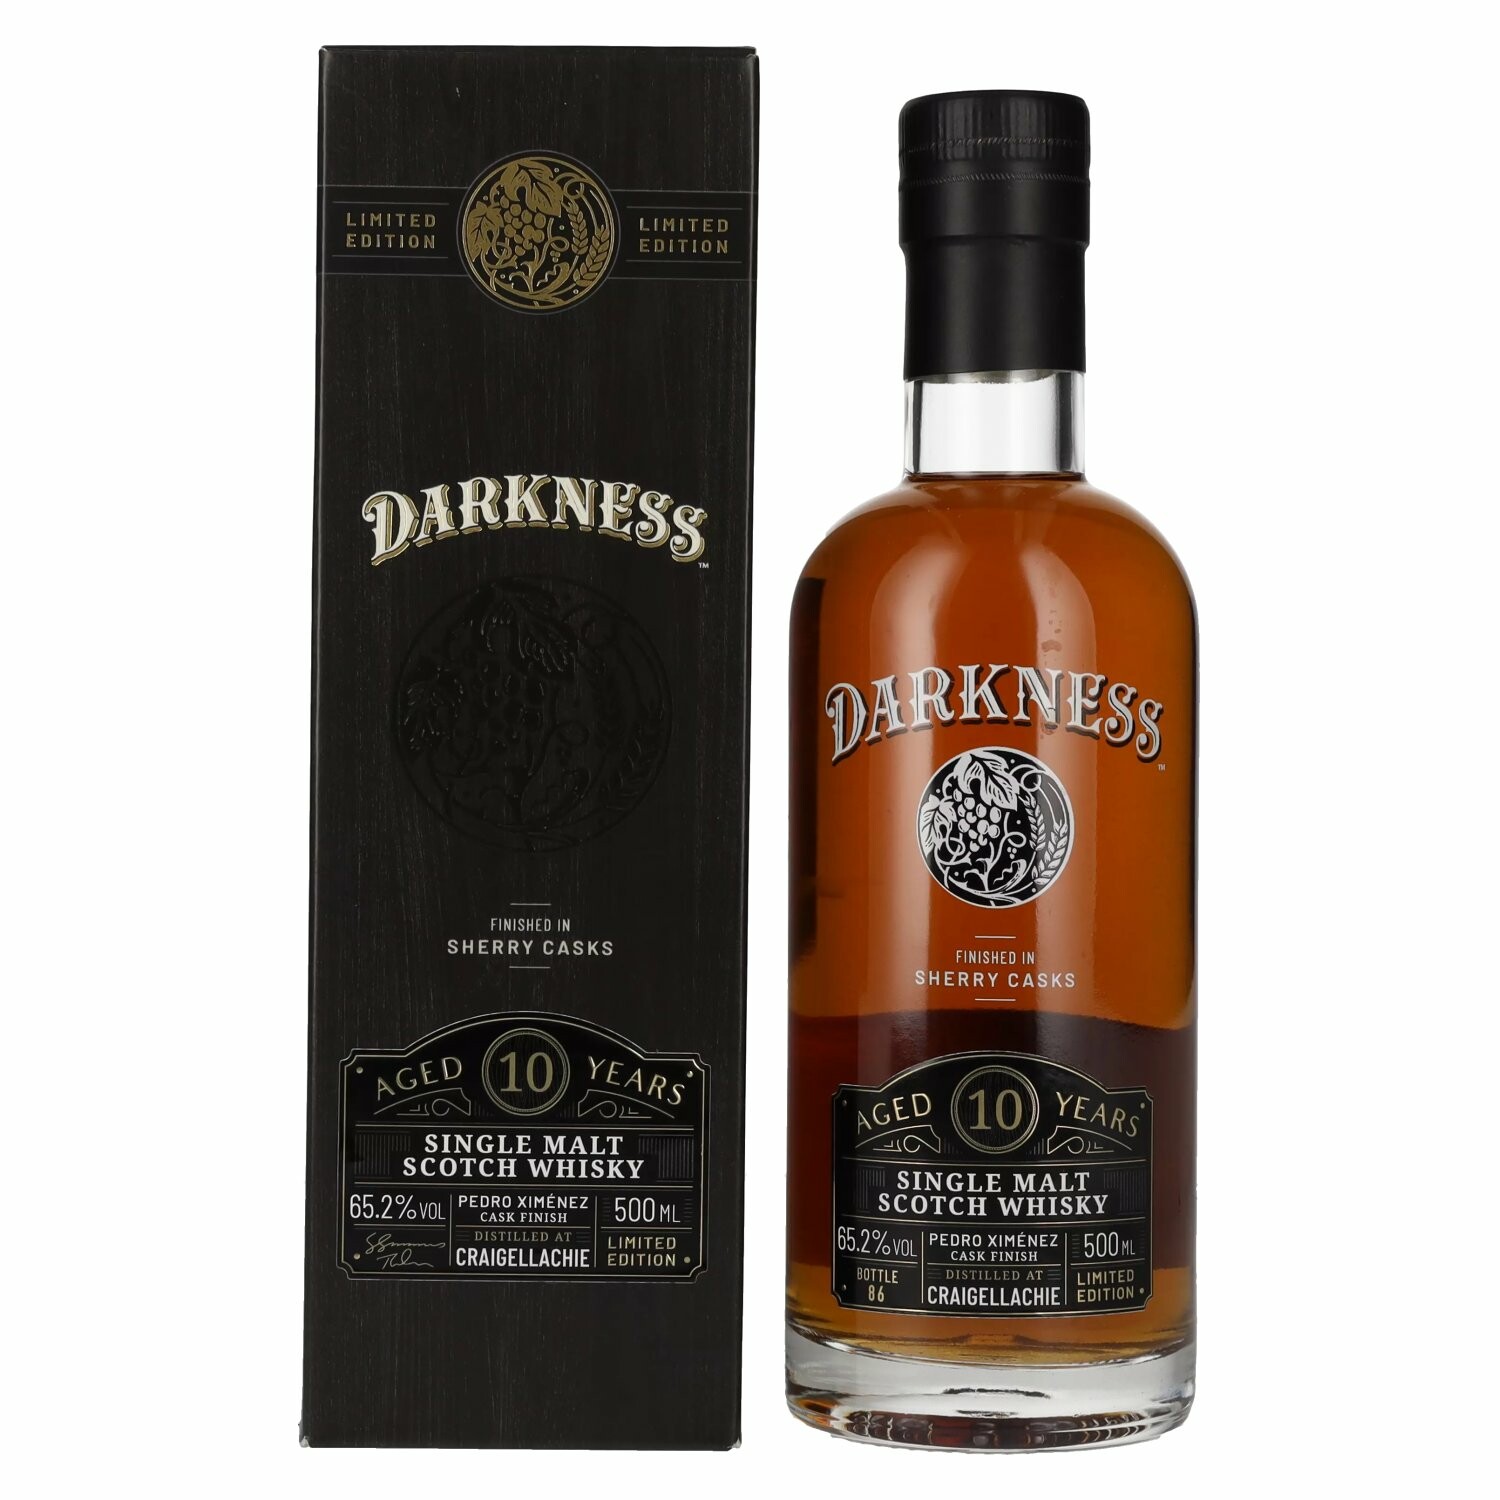 Darkness CRAIGELLACHIE 10 Years Old PX CASK FINISH 65,2% Vol. 0,5l in Giftbox